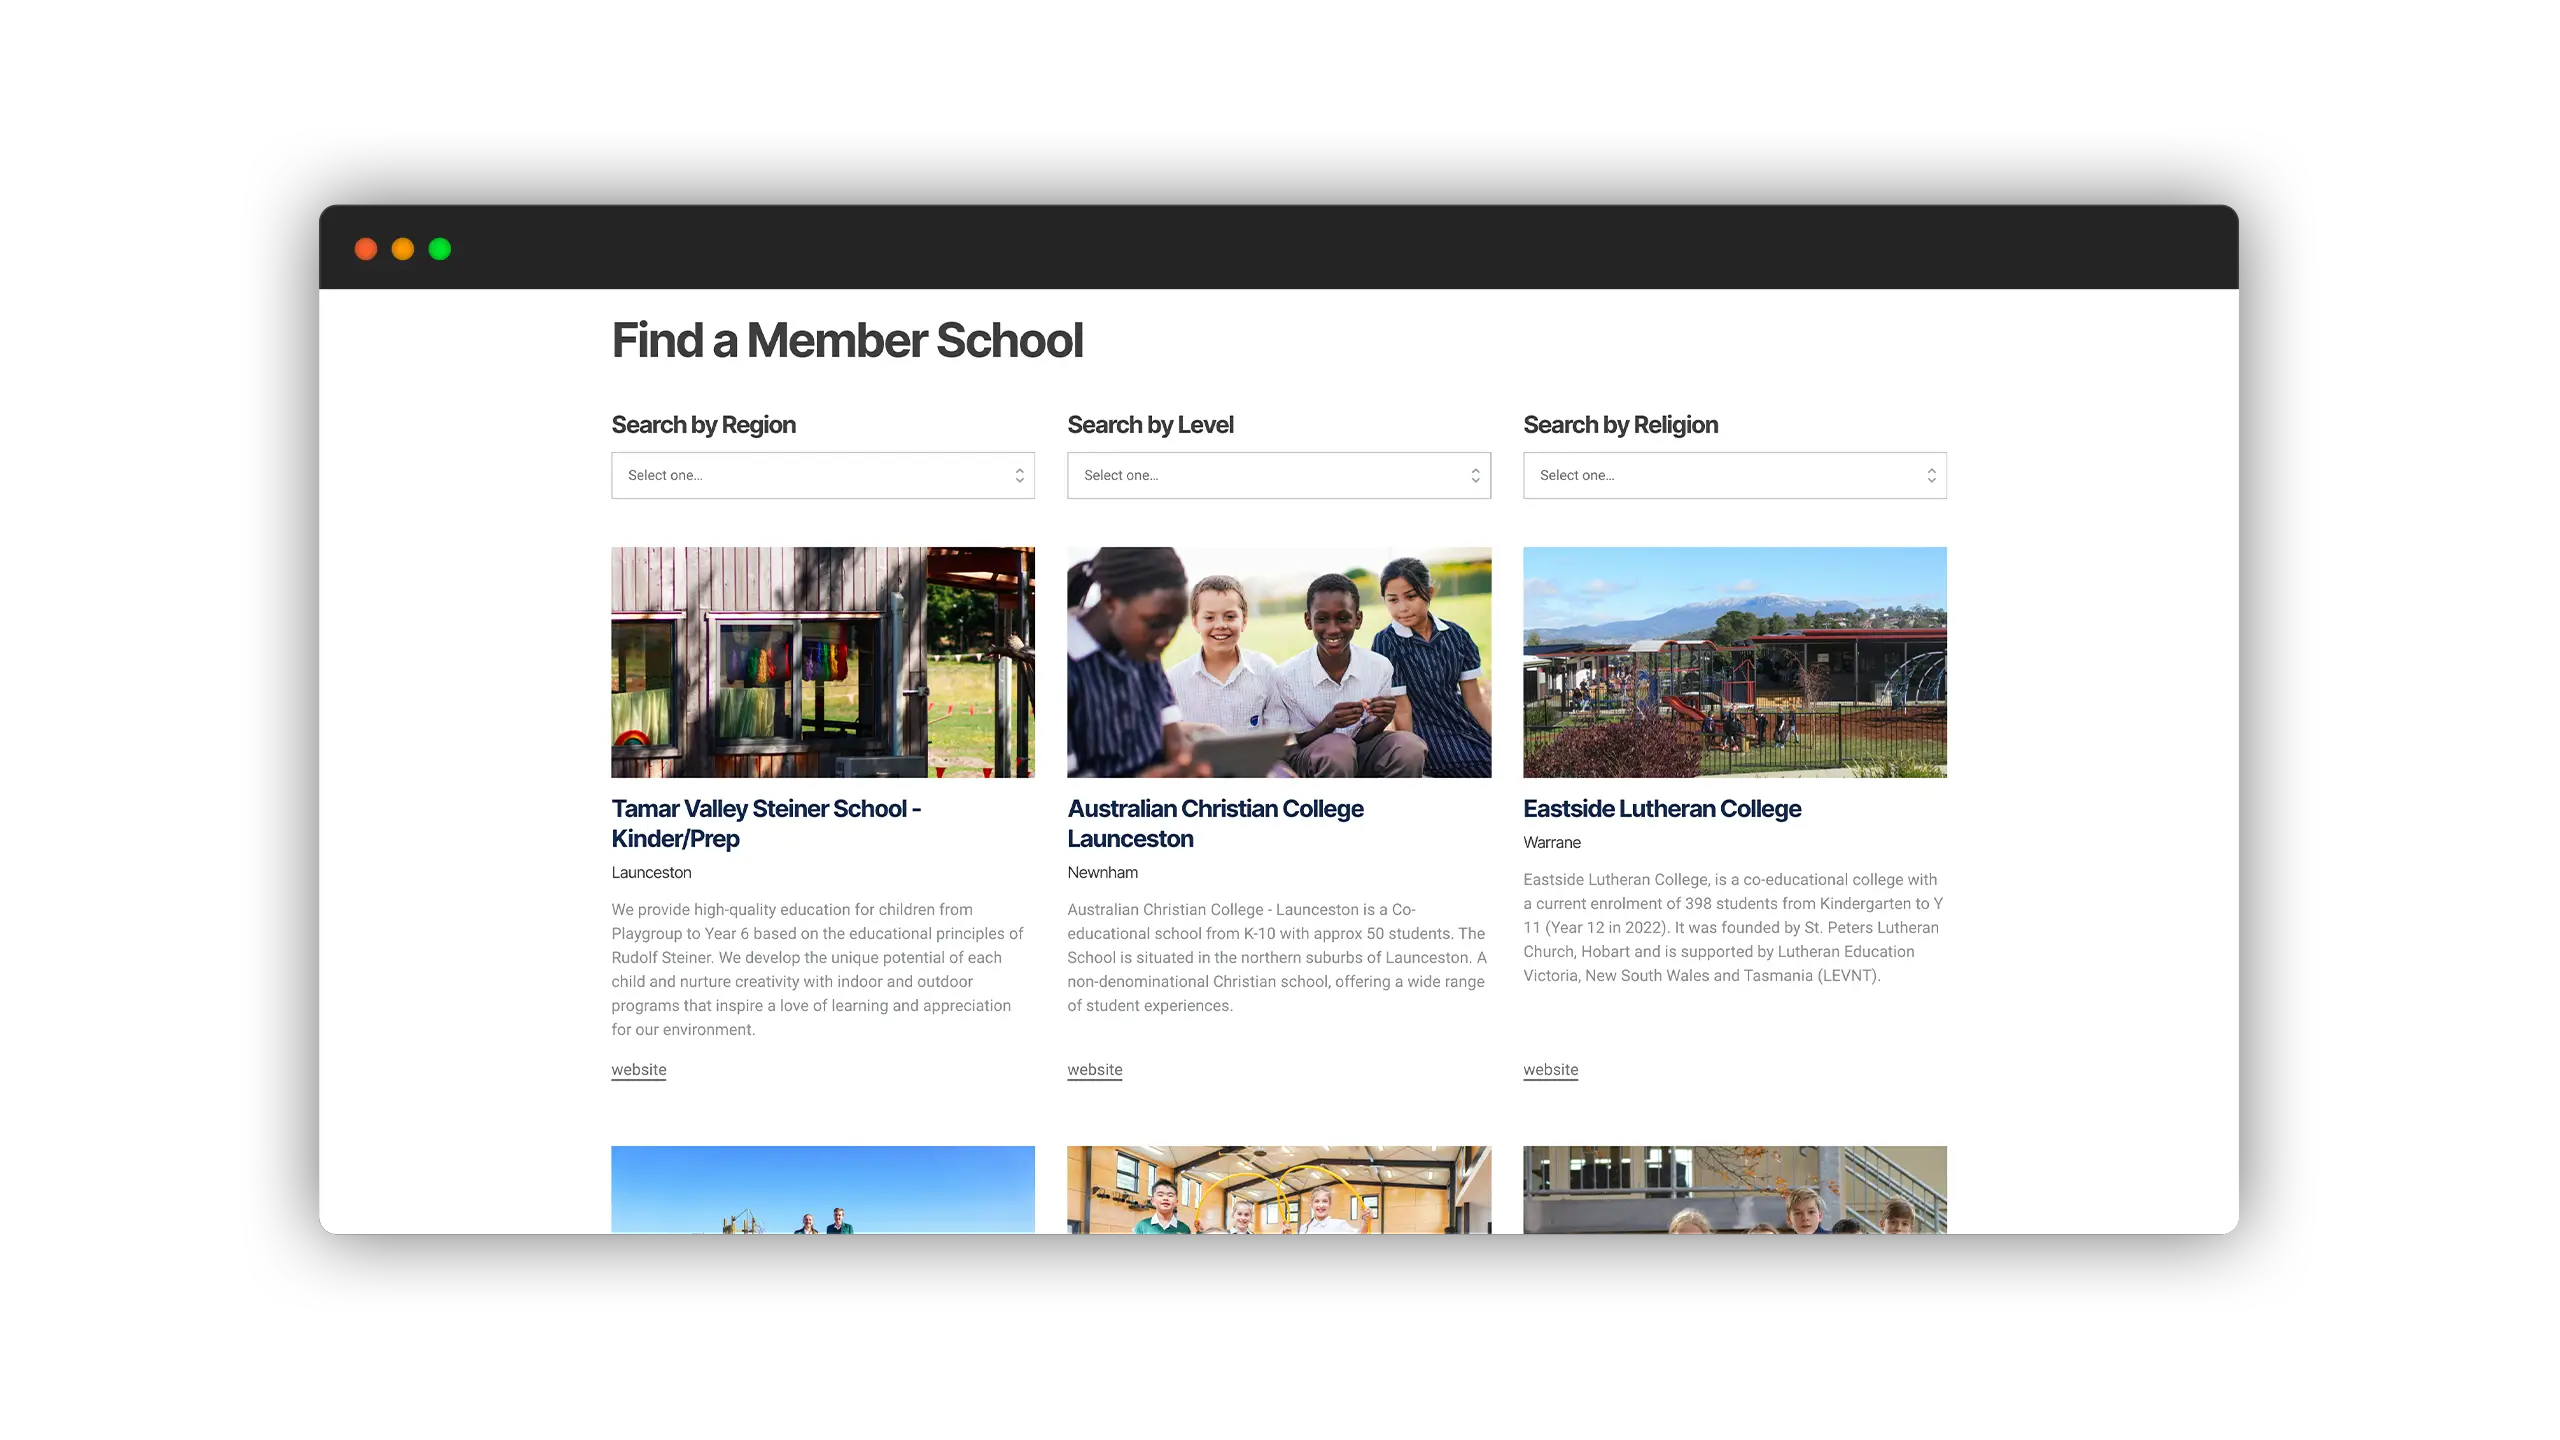 Independent Schools Tasmania - new website find a school search functionality with multiple school images and descriptions